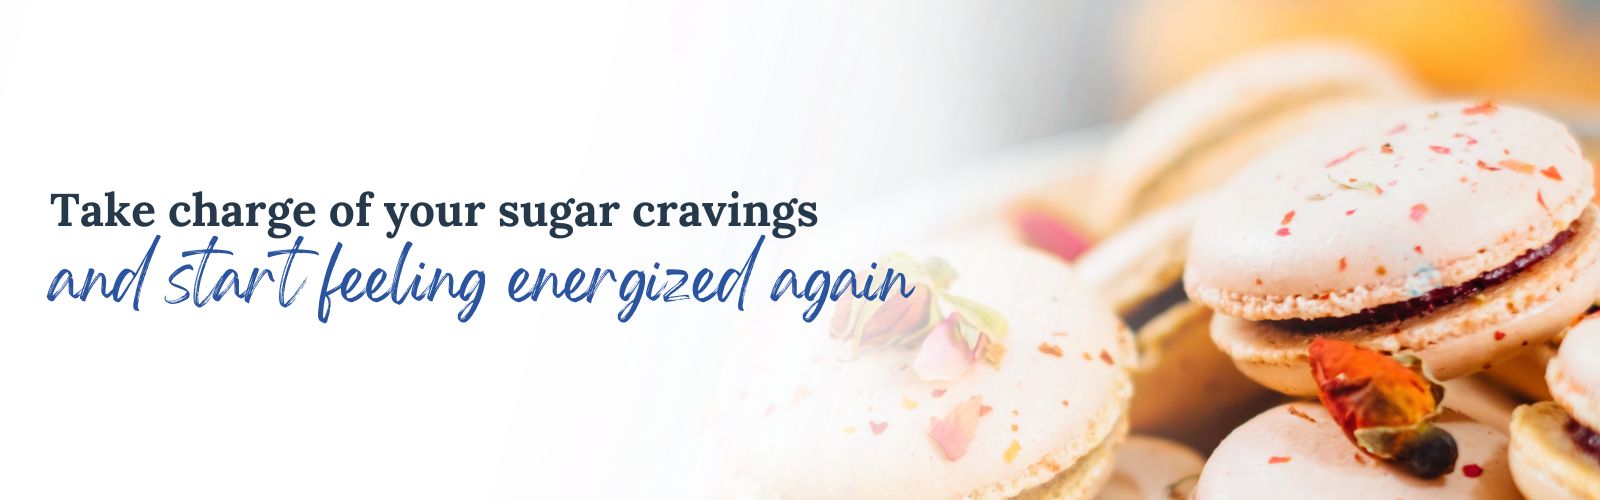 Take charge of your sugar cravings - Voula Manousos